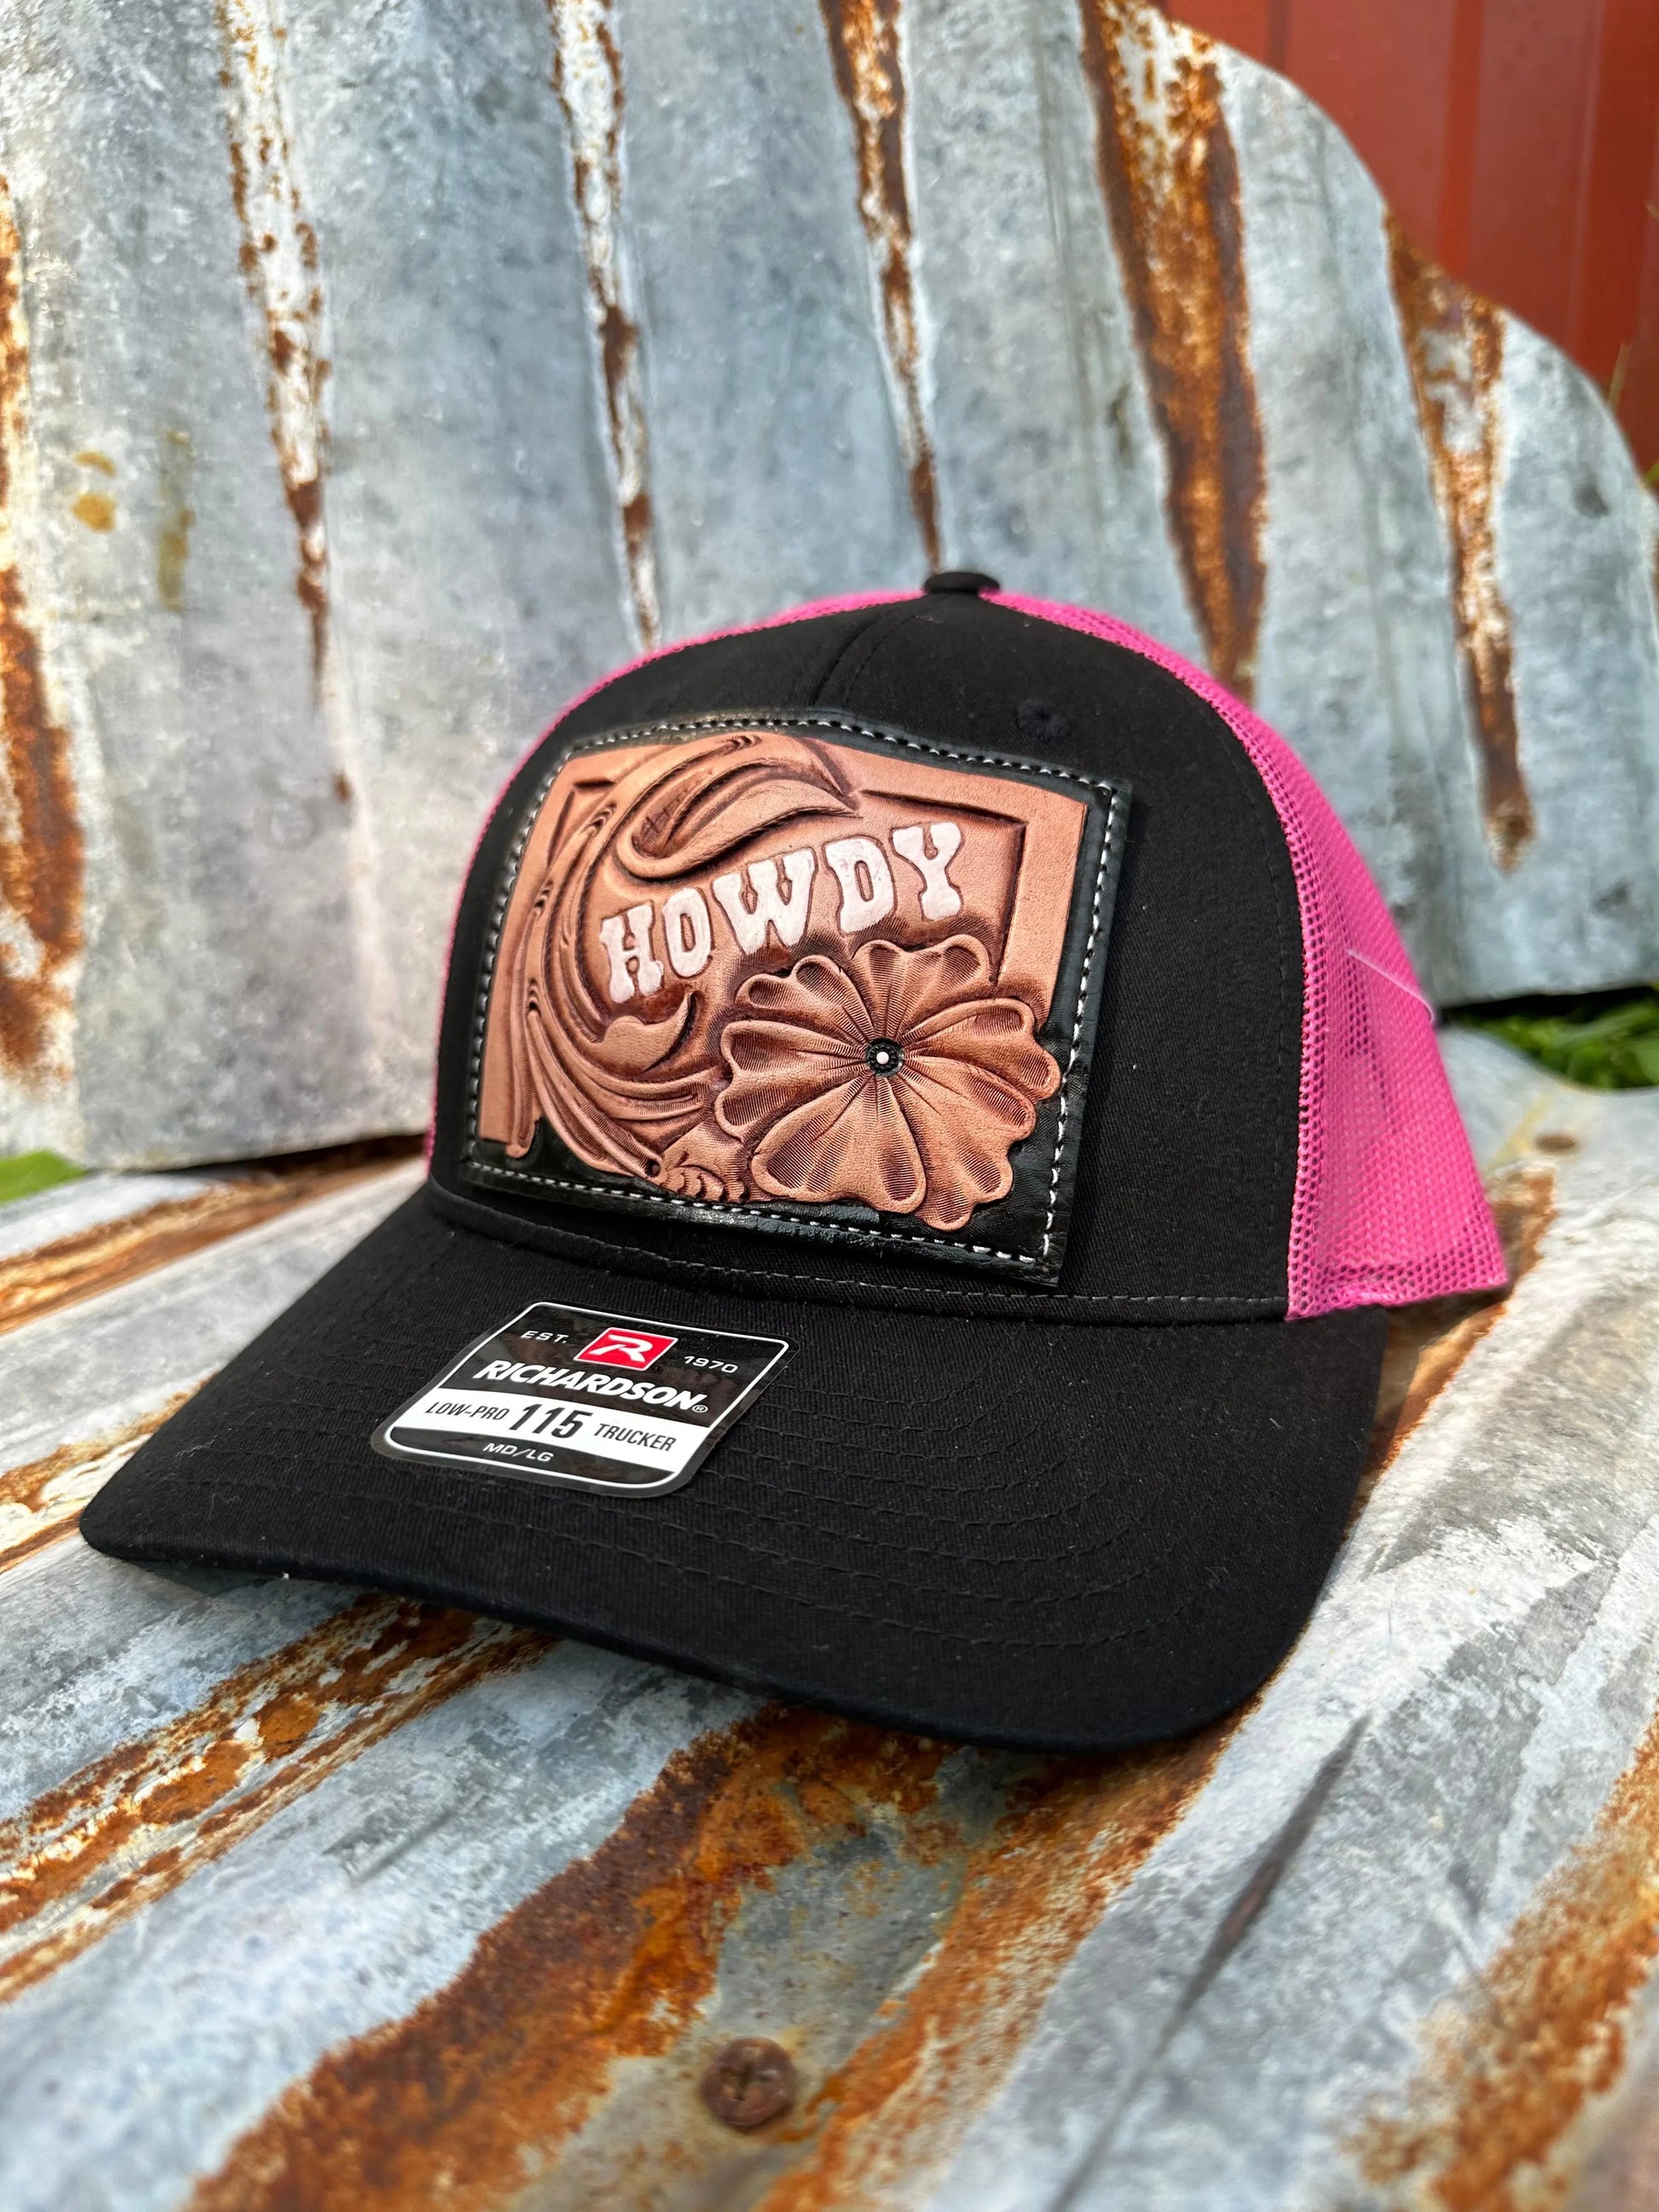 Howdy Floral Hand Tooled Patch Cap***special edition colors*** The Rodeo Rose